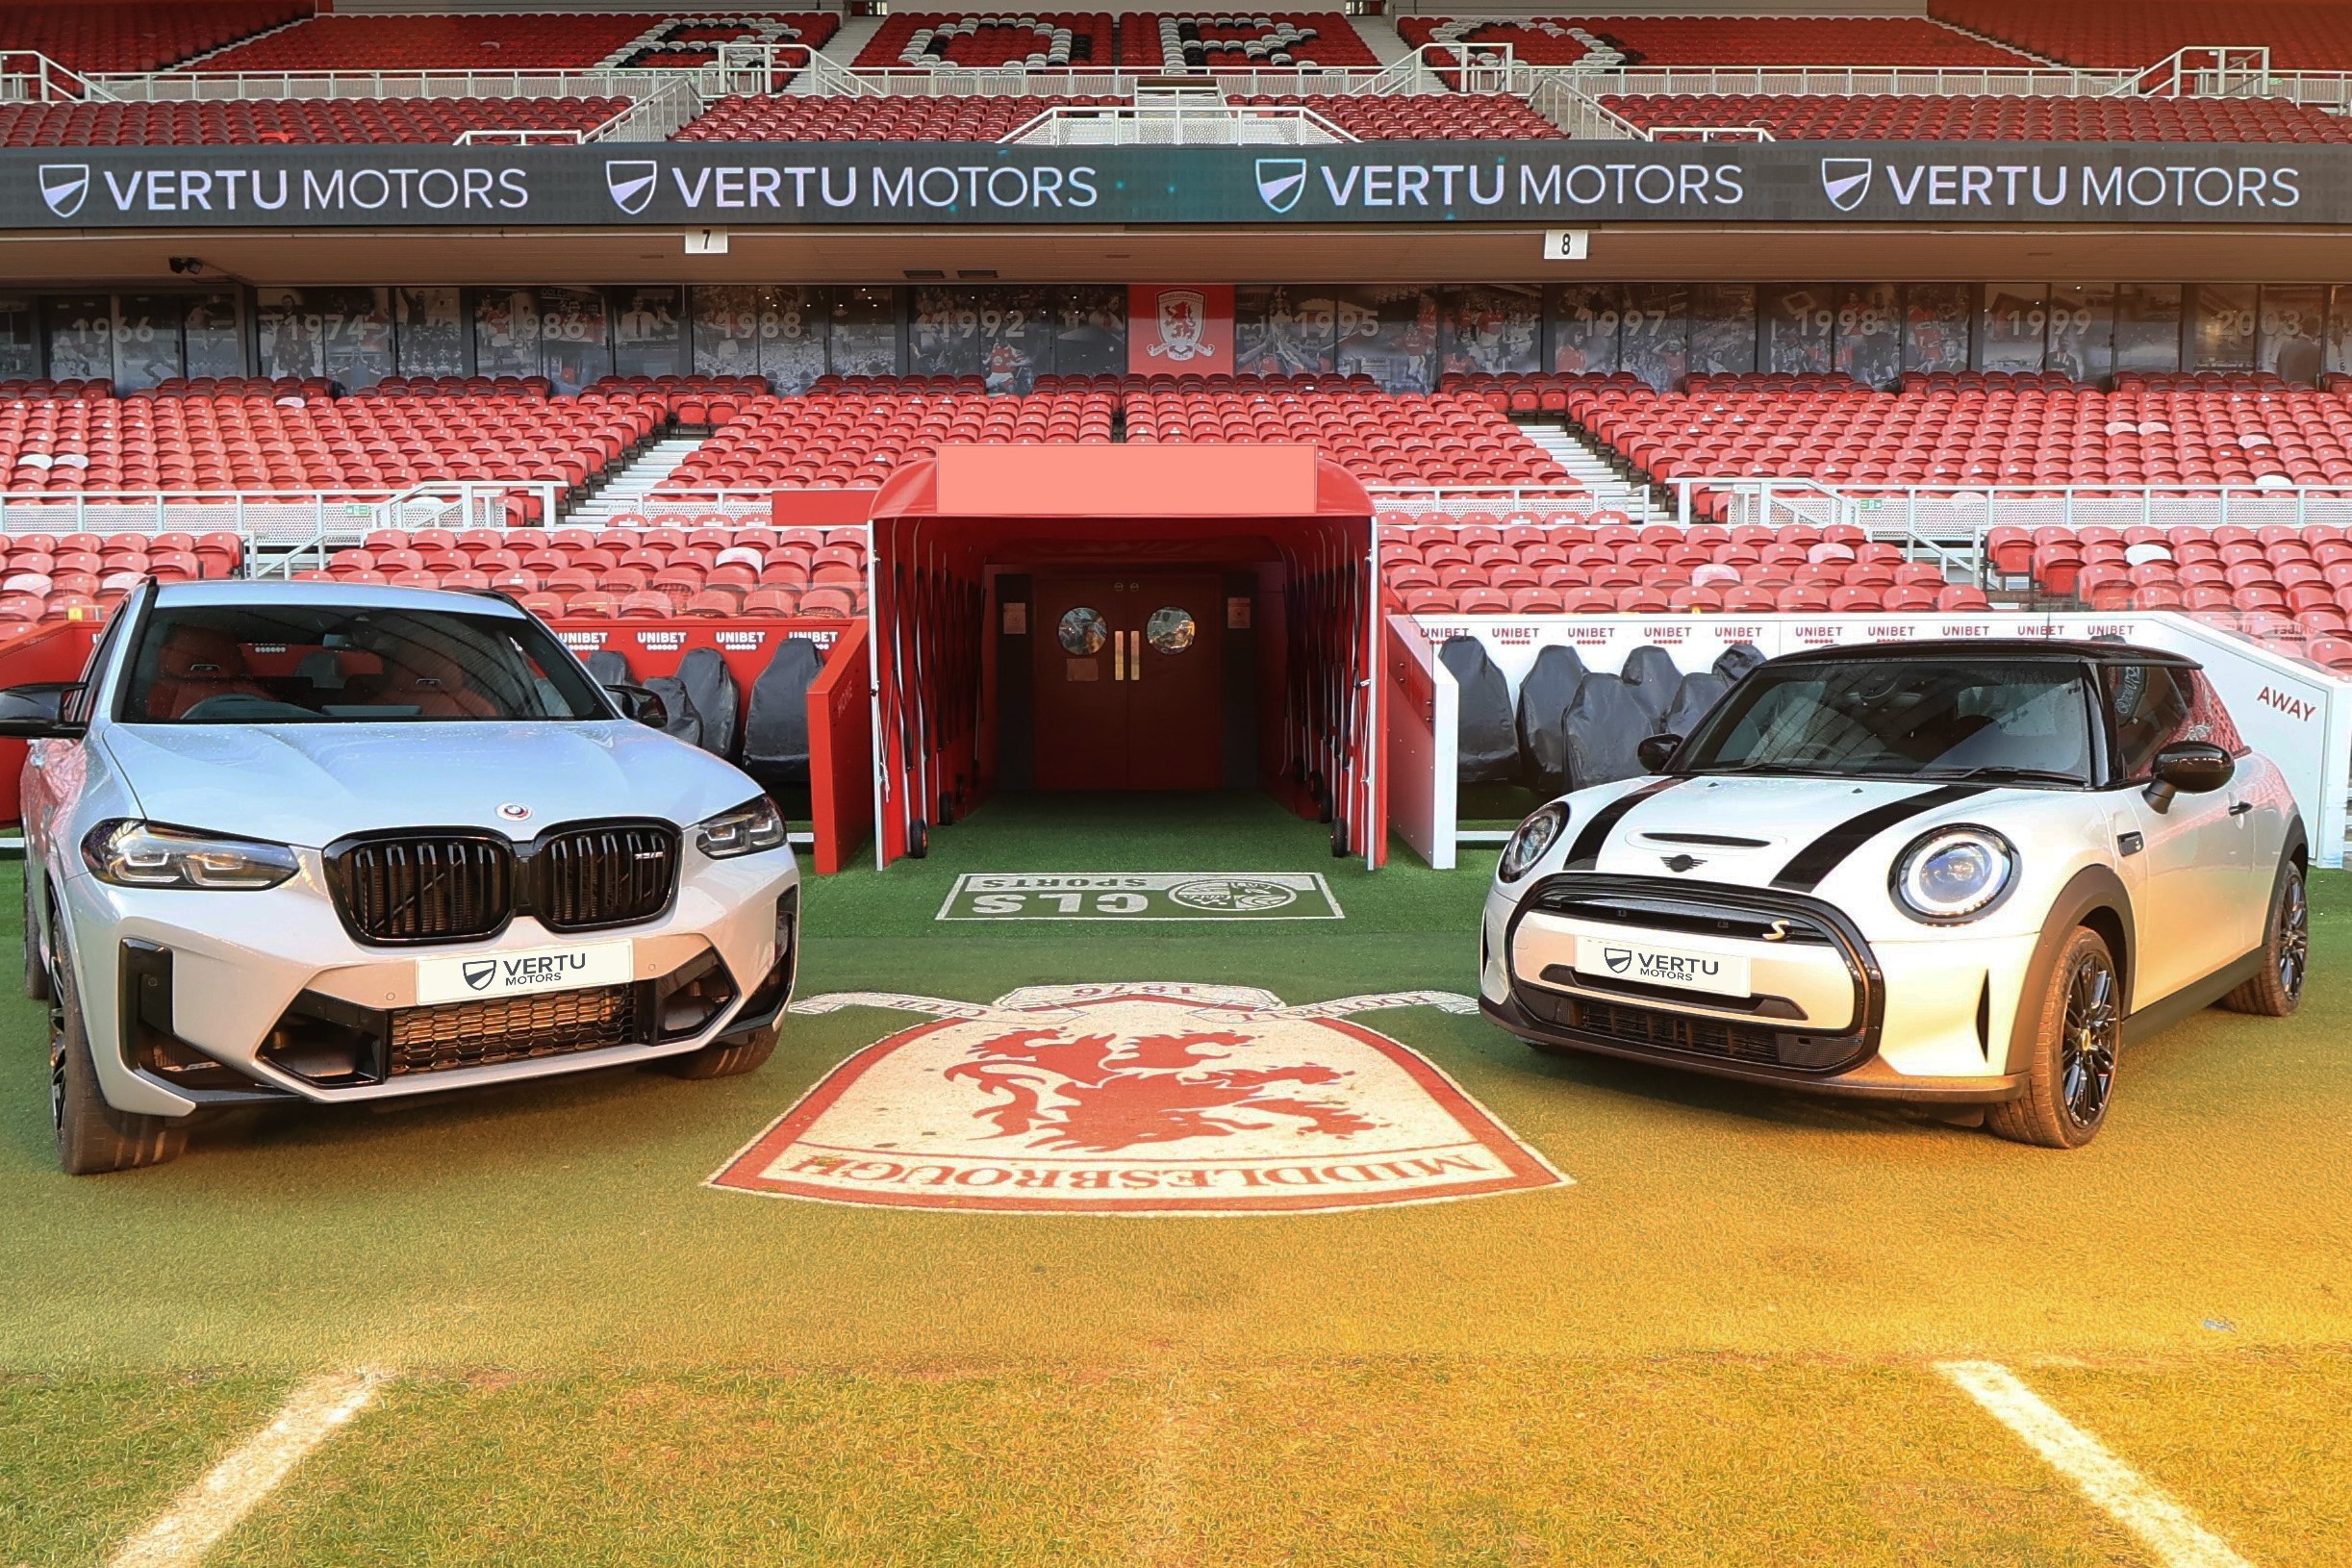 Vertu Motors Continues its Support For The Boro